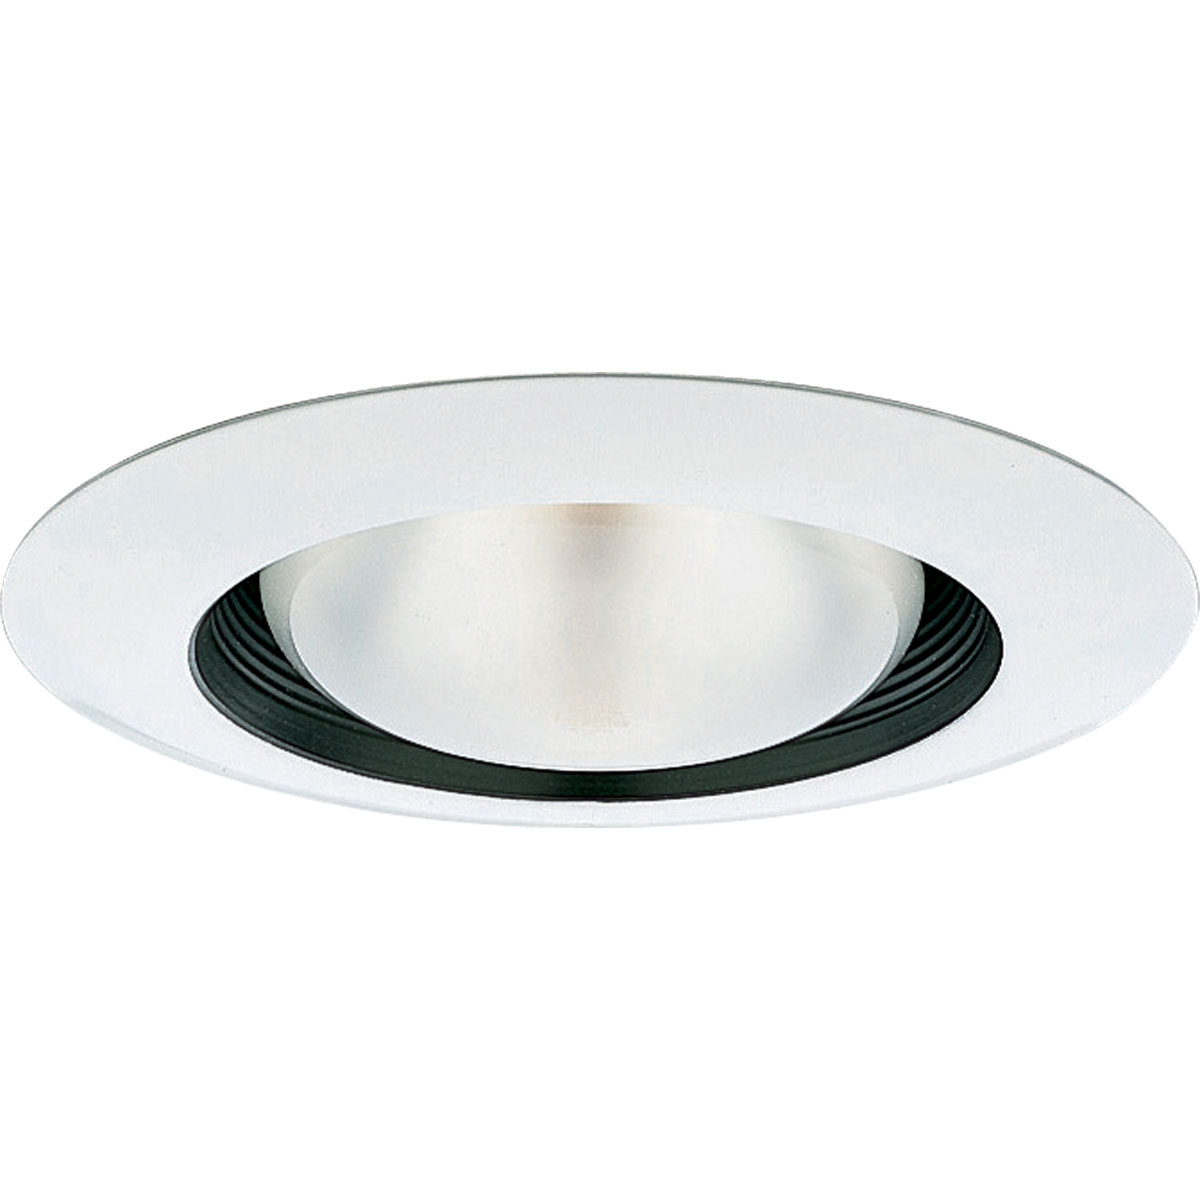 6 in Step Baffle Splay in Black finish with bright white powder painted metal flange. For insulated ceilings. 8-3/4 in outside diameter.